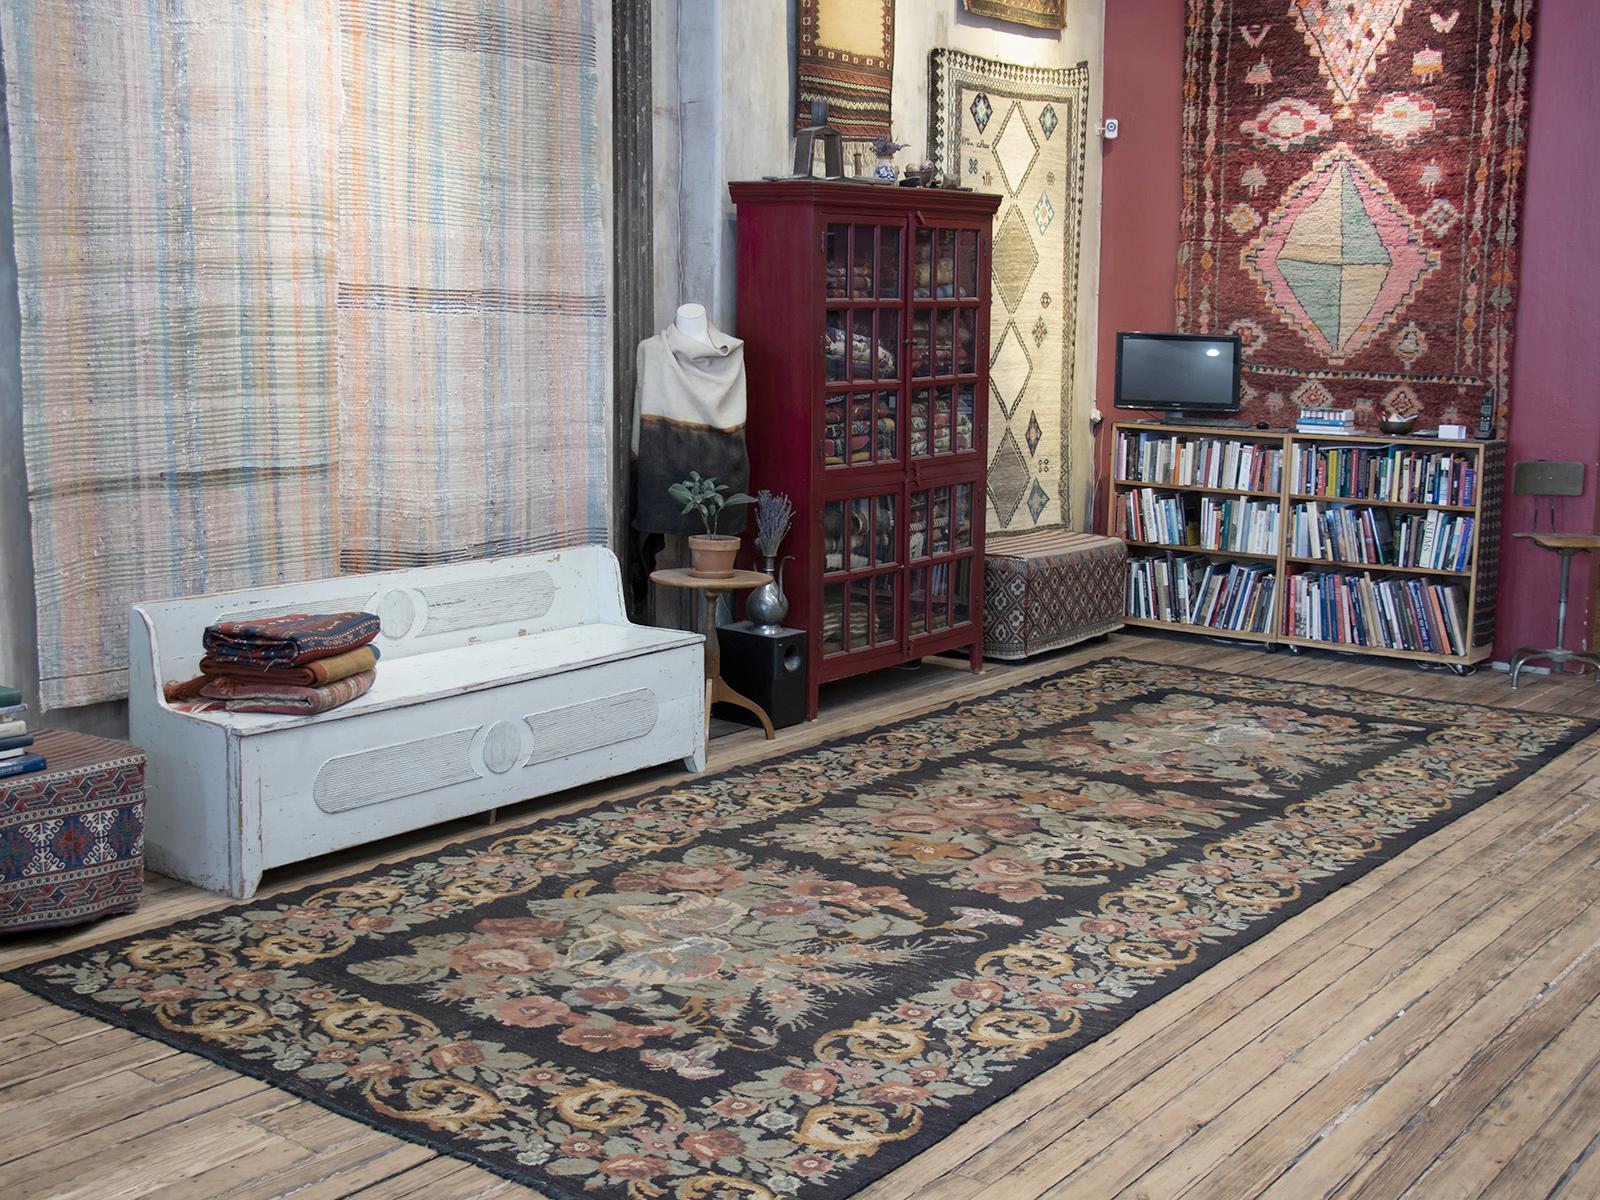 The historical region of Bessarabia in Eastern Europe, in present day Moldova and Ukraine, is famous with its kilims adorned with realistically drawn floral designs. This Kilim is a great example of that tradition, with beautifully articulated